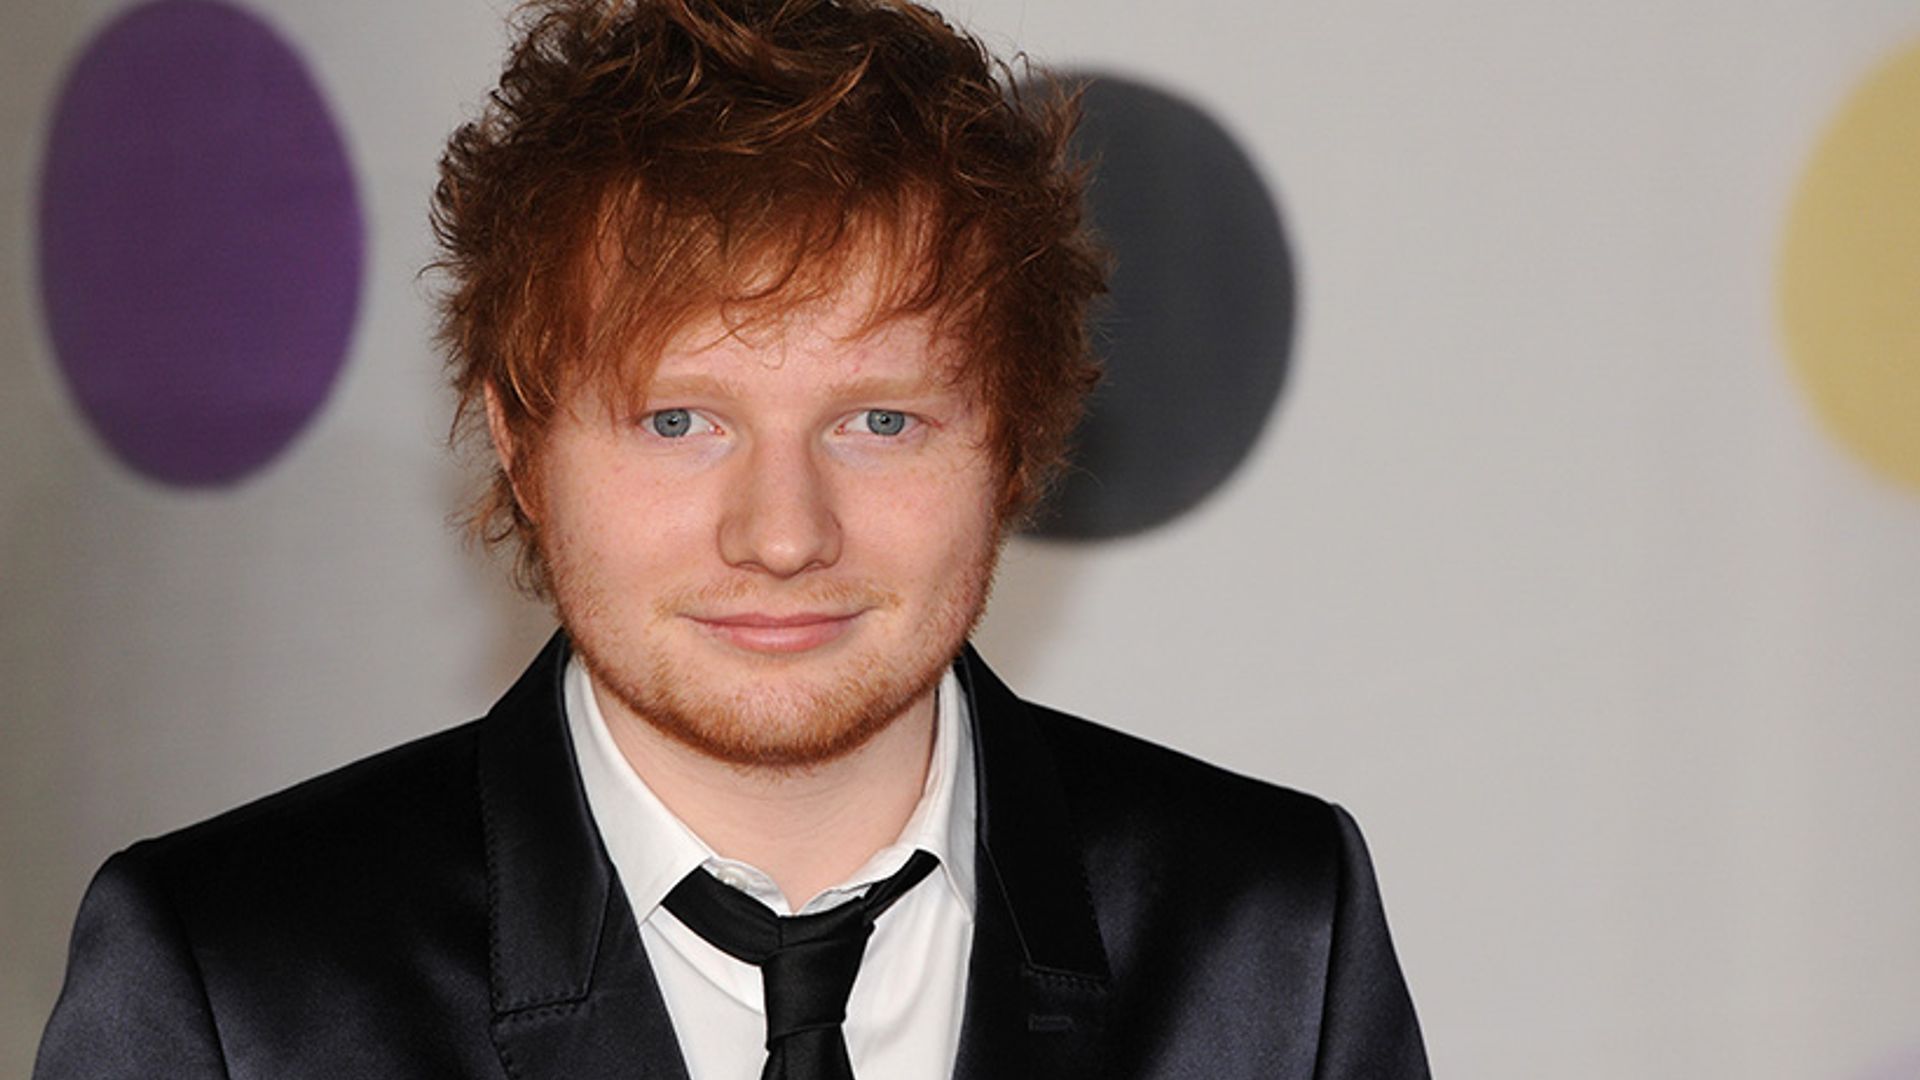 Ed Sheeran releases TWO new singles: Listen to them here!